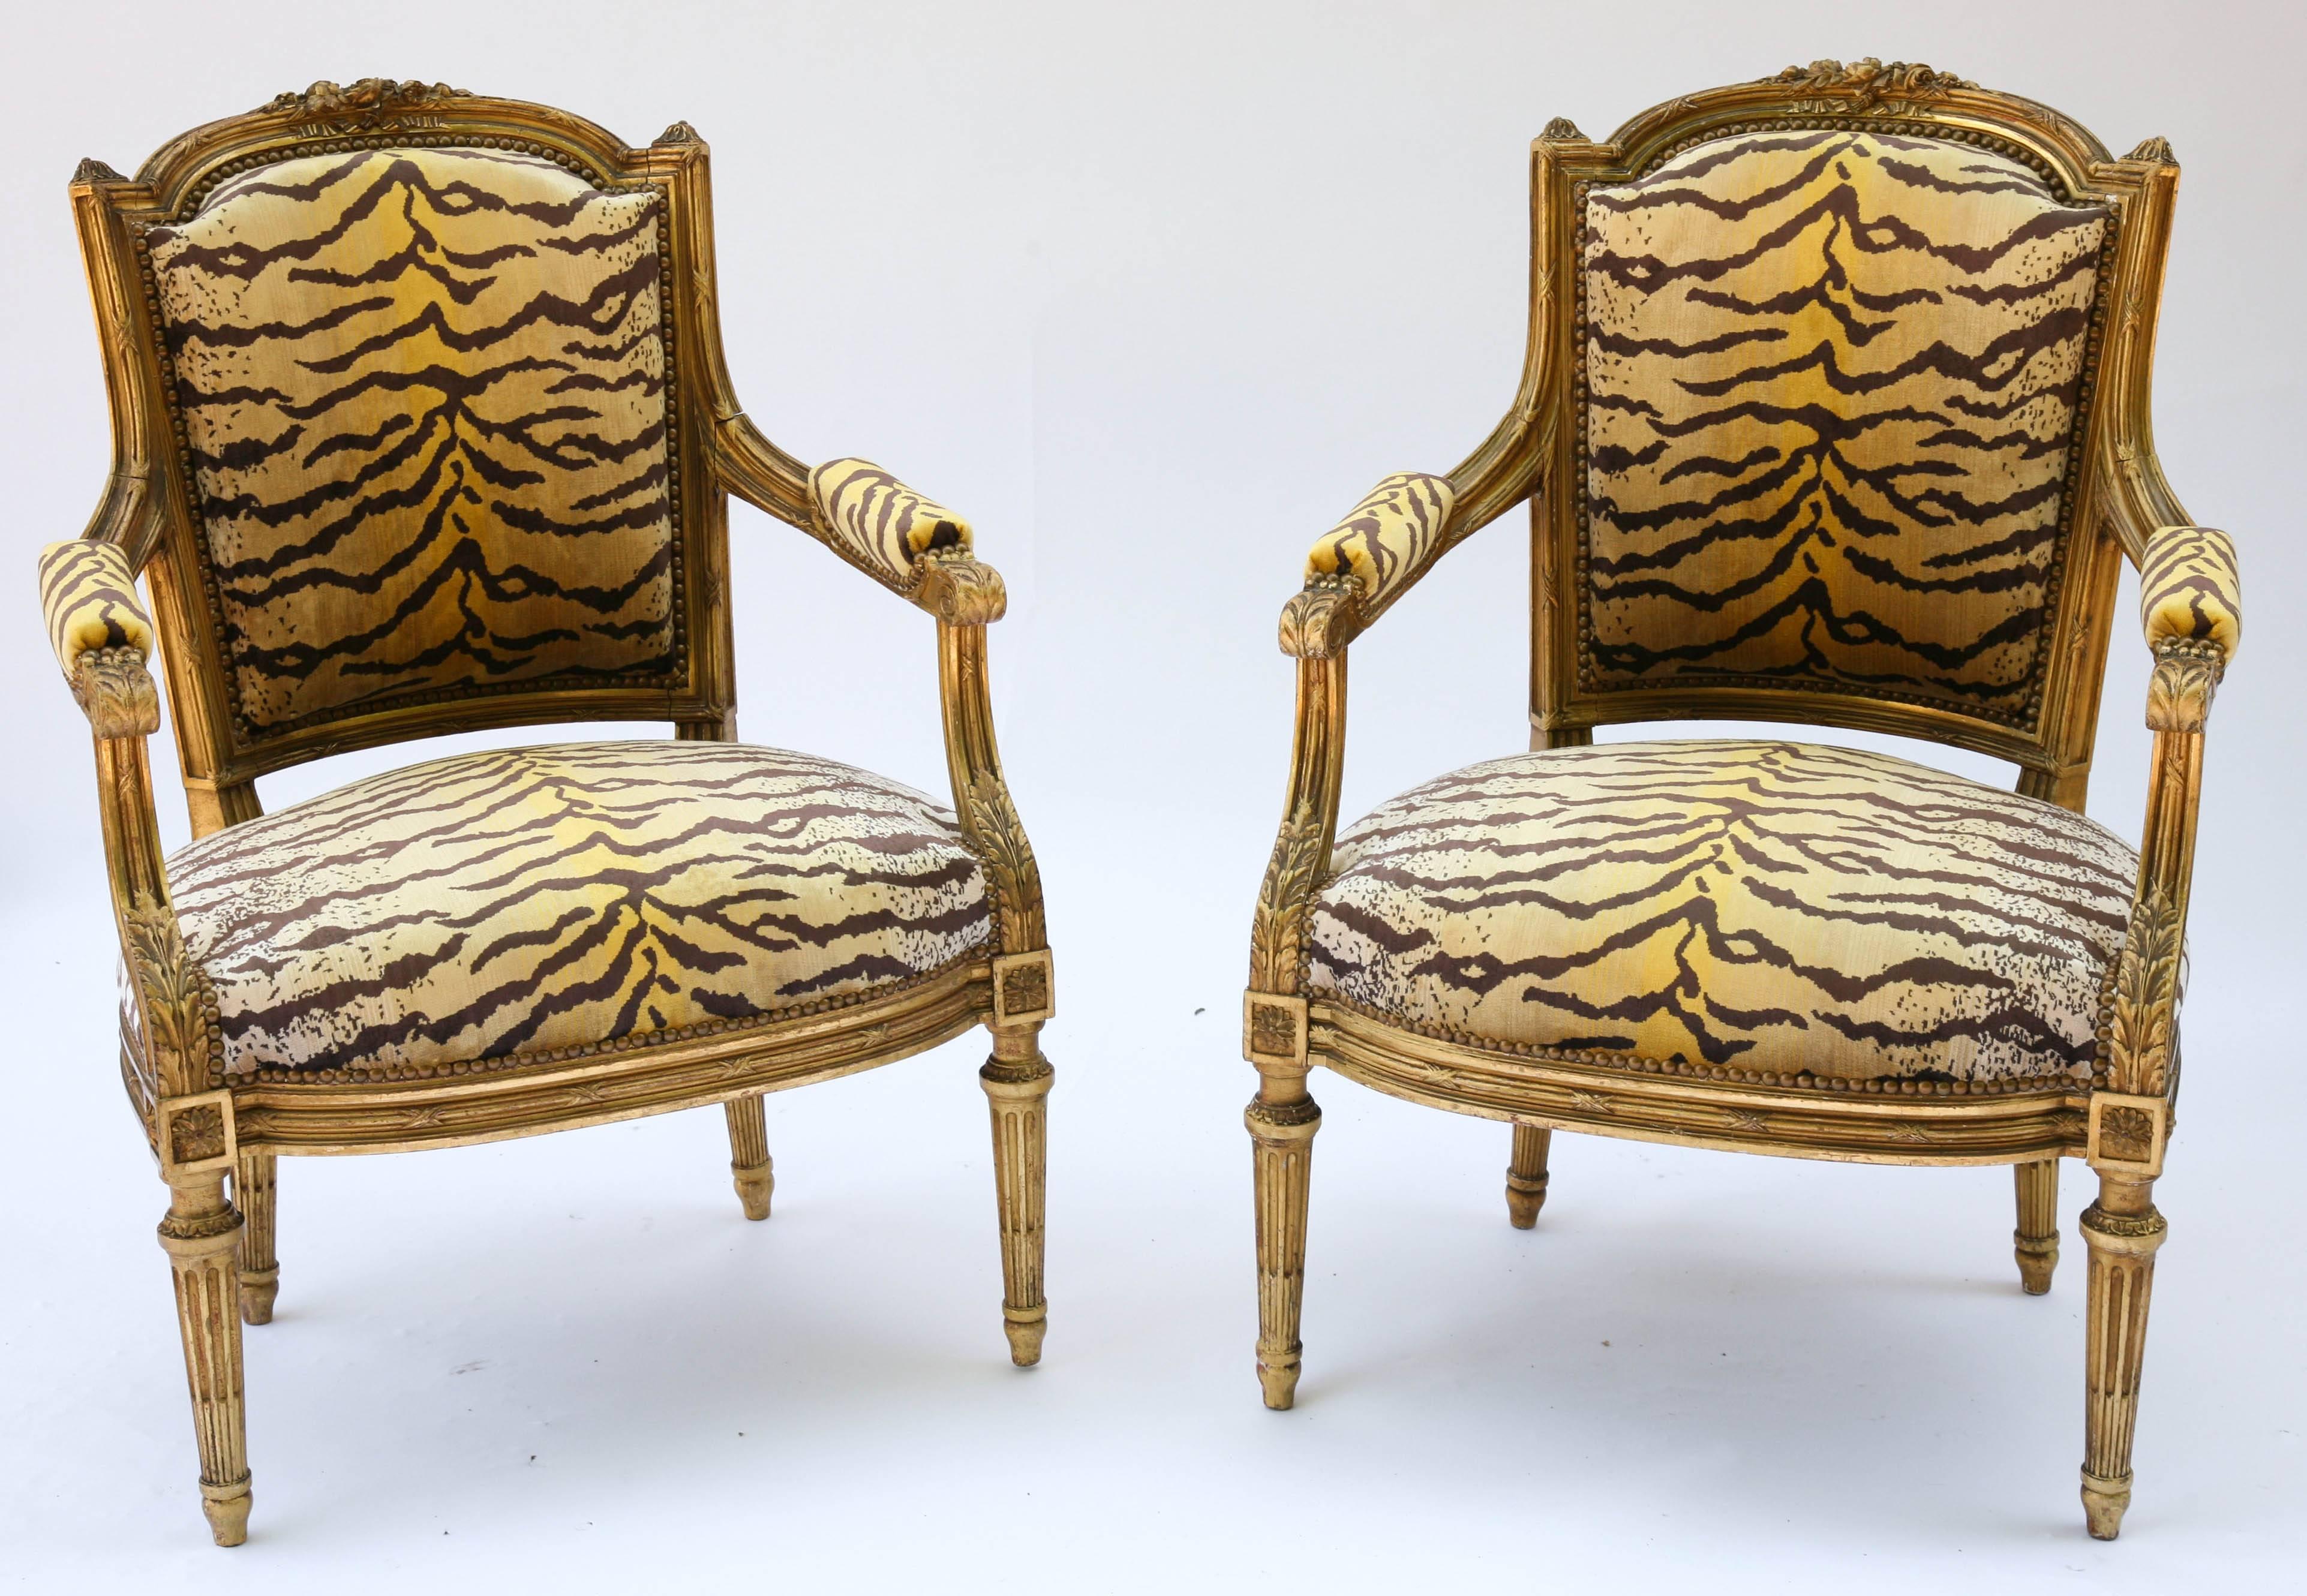 Exquisite pair of signed "Guignon & Fils," Louis XVI fauteuils, of carved giltwood, each having an arched channeled crestrail, centered by flowers and ribbons, flanked by finials, padded tapering back into seat with crown cushion,